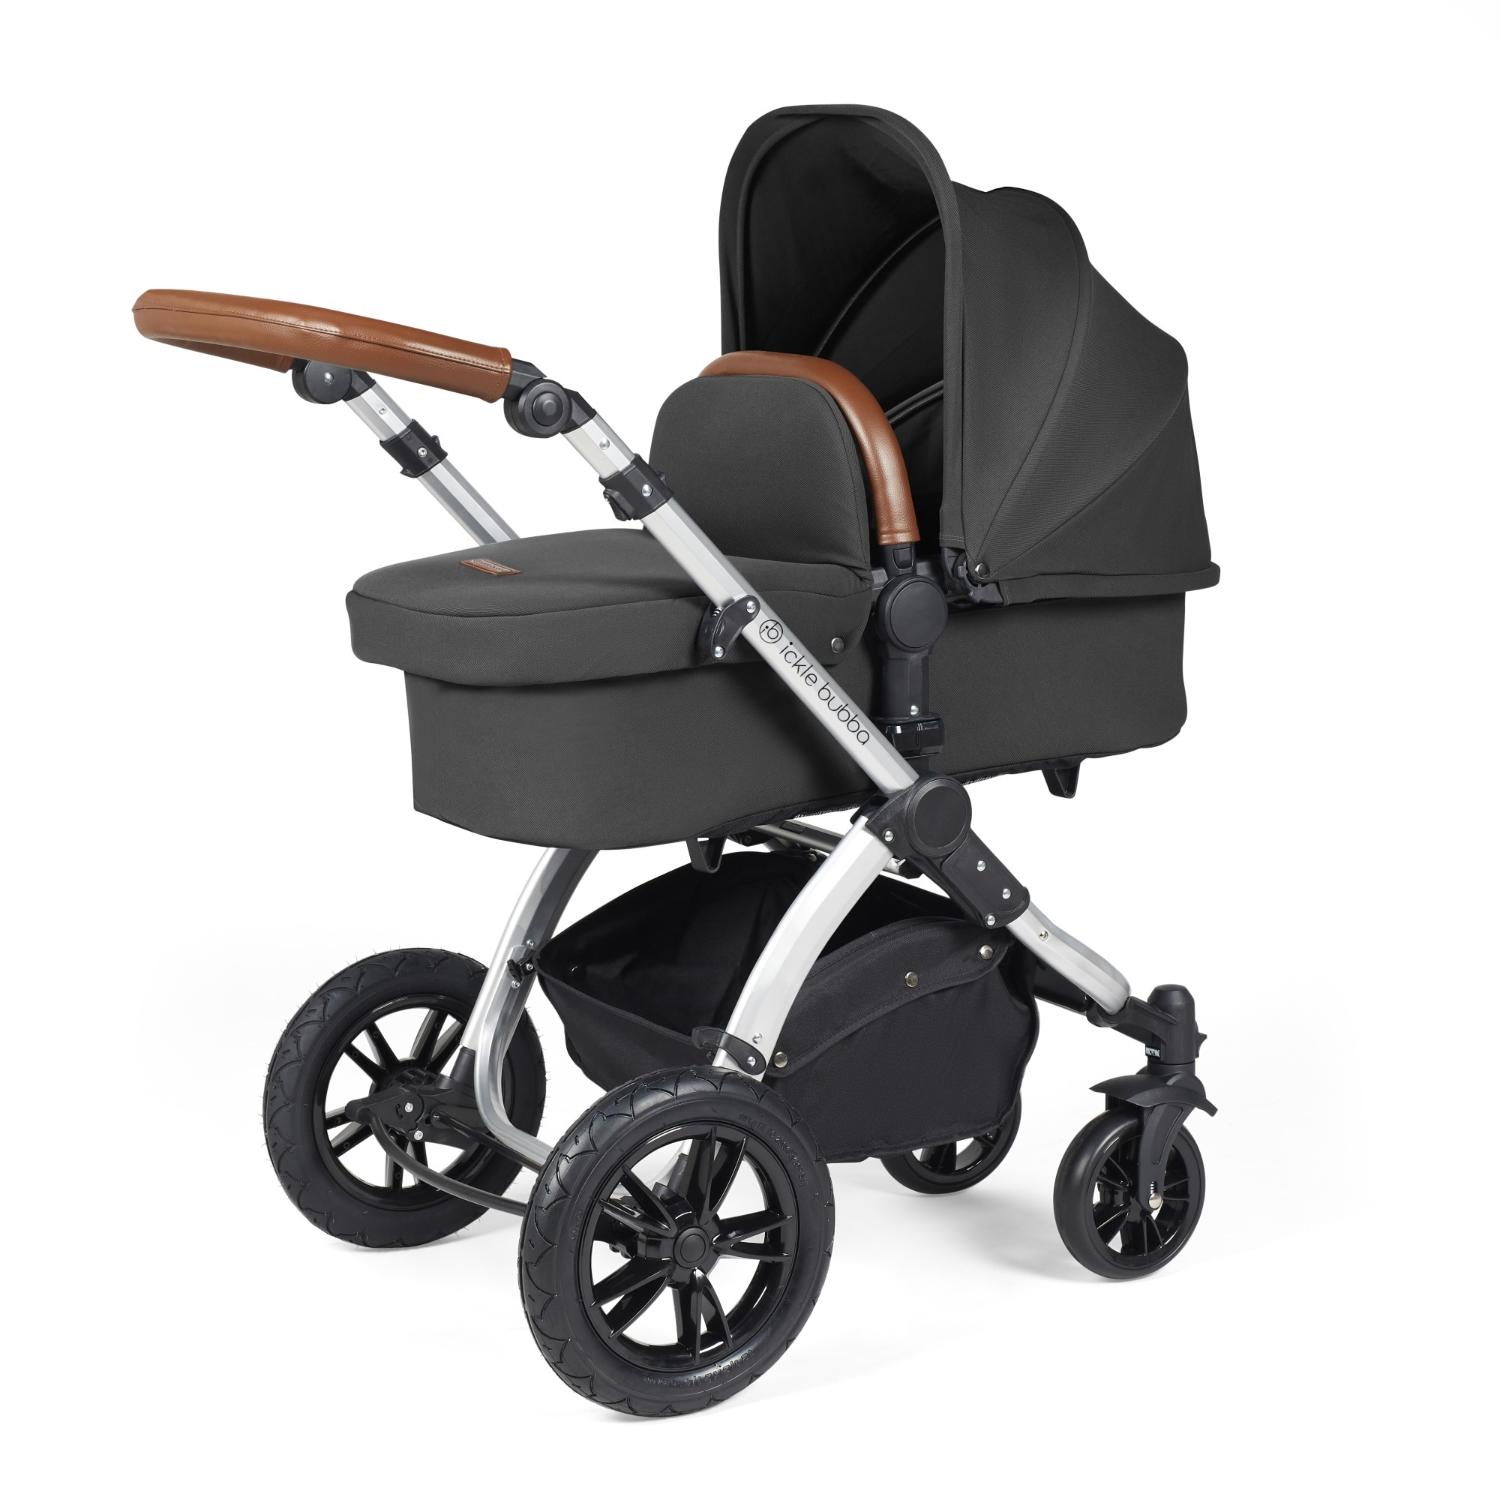 Ickle Bubba Stomp Luxe Pushchair with carrycot attached in Charcoal Grey colour with silver chassis and tan handle